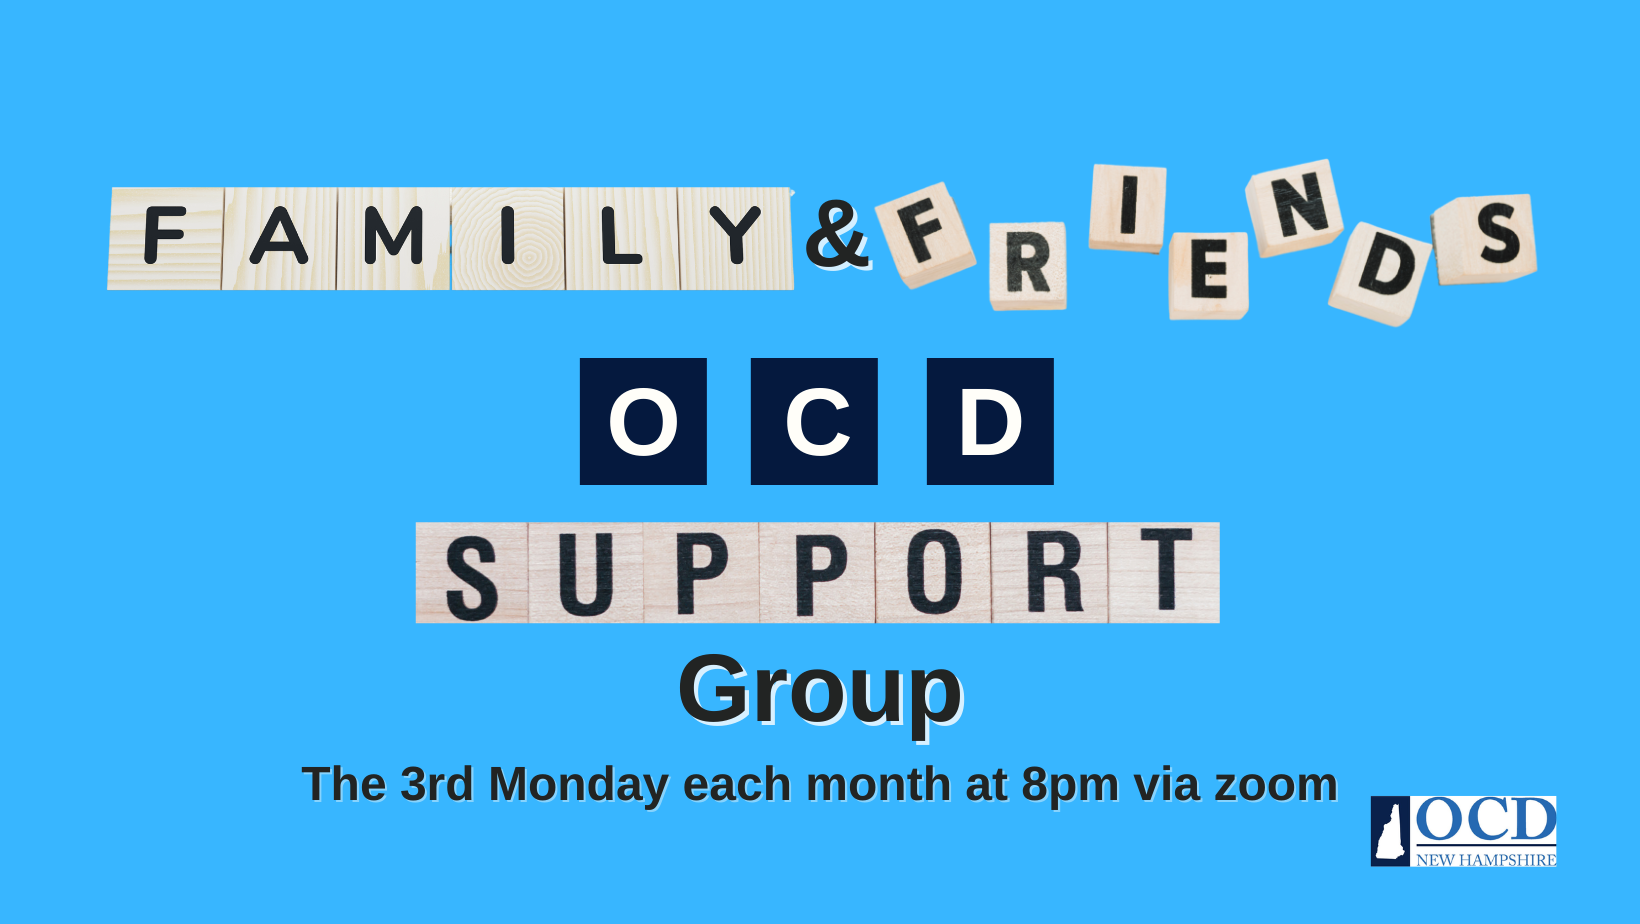 New Virtual Support Group for Family and Friends!